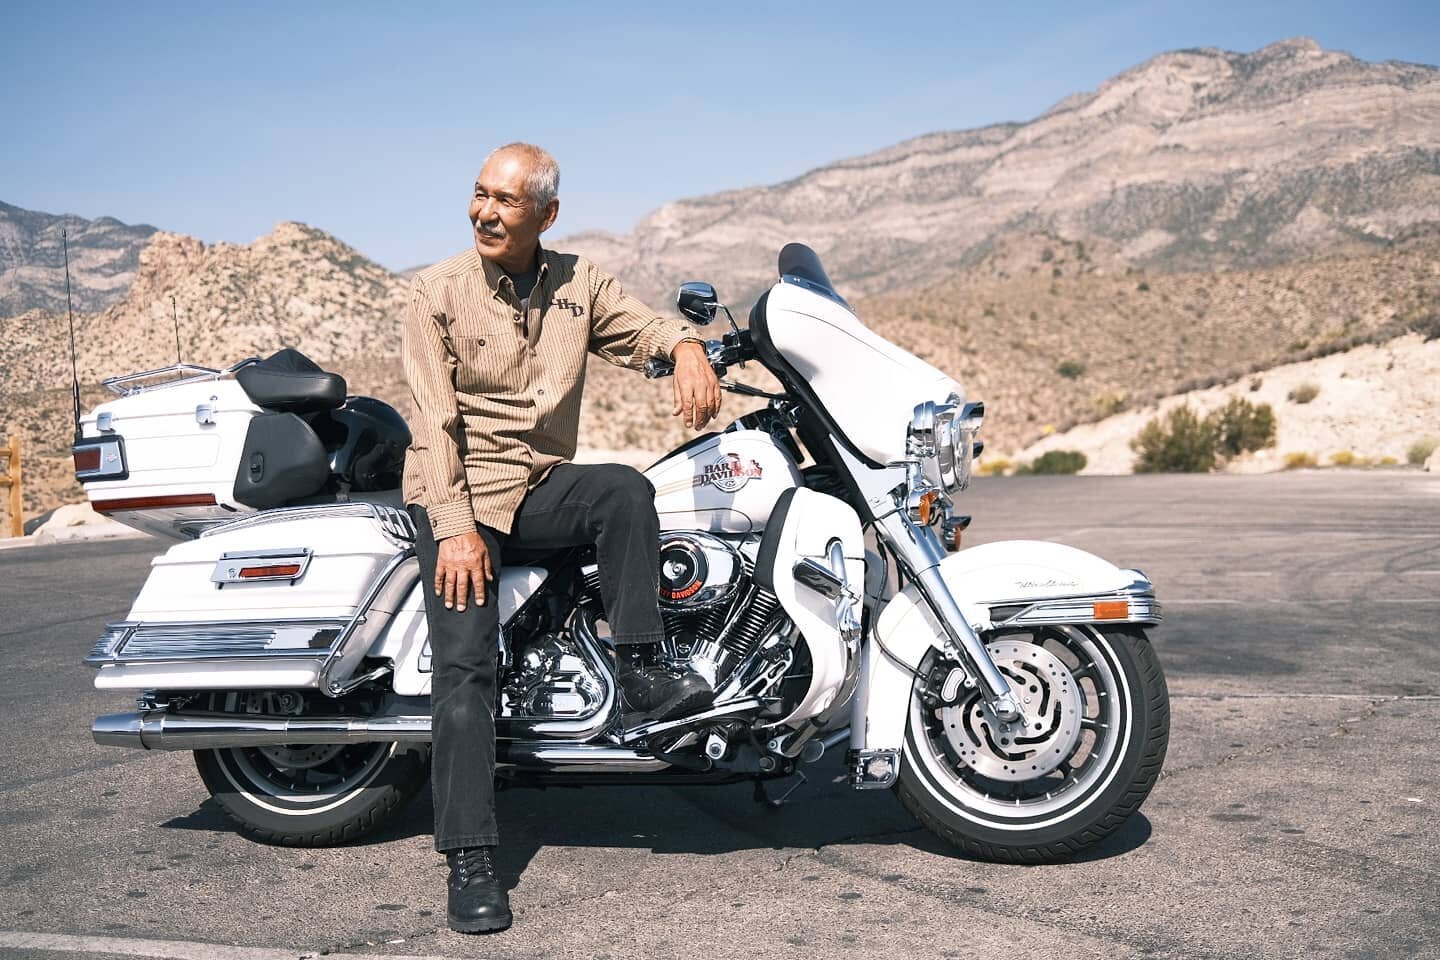 Raul was talking about one of his riding friends that introduced him to a coffee shop we went to. Lo and behold he was there and was down to ride with us through red rock!

Everyone meet Henry!